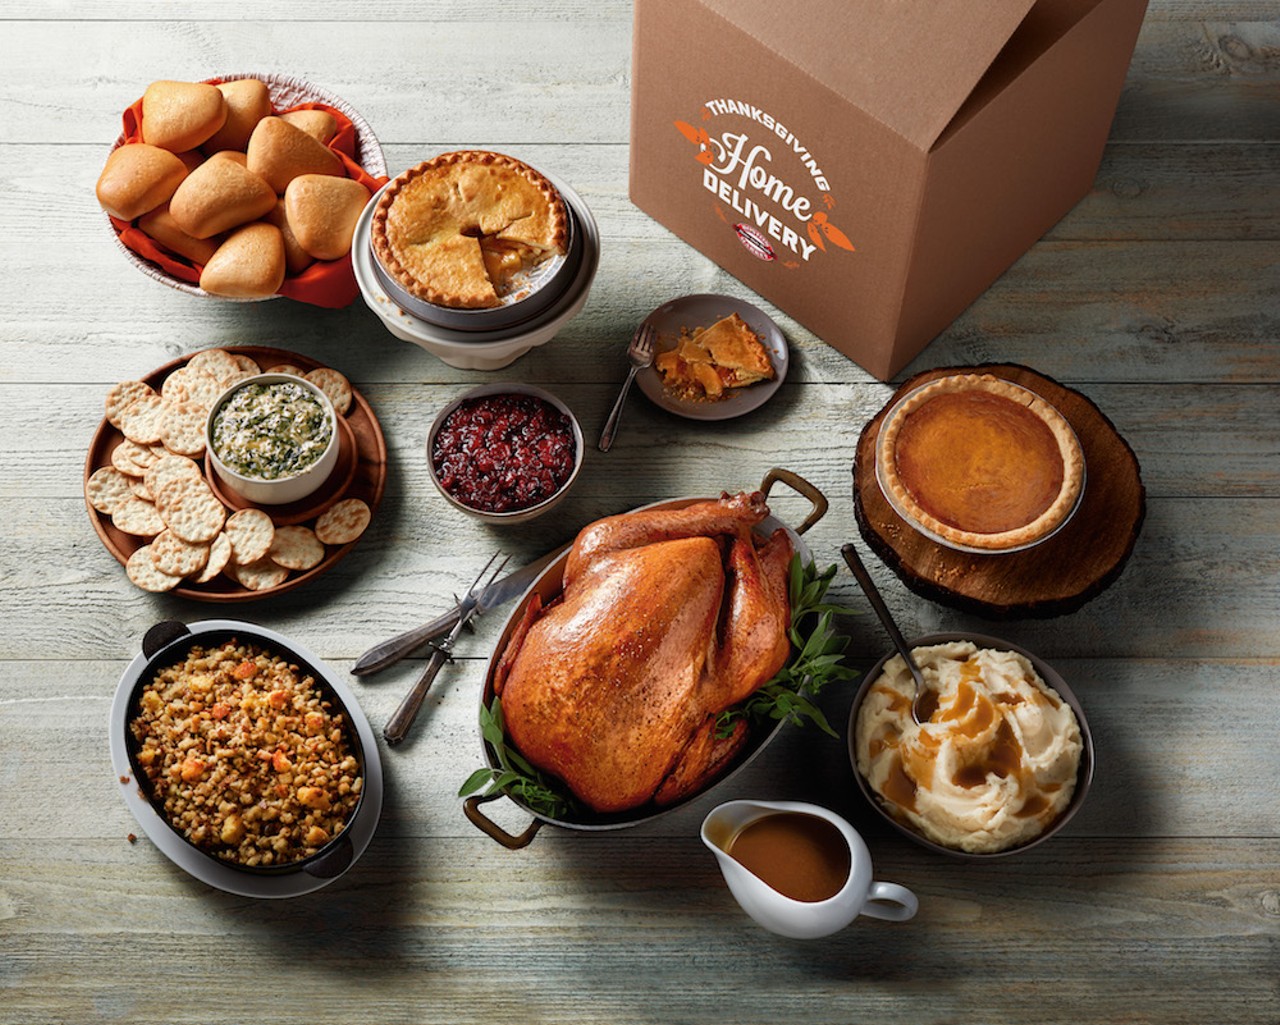 Boston Market
Various locations, Tampa Bay.
Open on Thanksgiving, Boston Market spotlights roasted turkey breast and signature rotisserie chicken as individual meals or &#147;feasts for three.&#148; Seasonal sides, appetizers and whole pies round out the offerings. Home delivery is available, too.
Photo via Boston Market